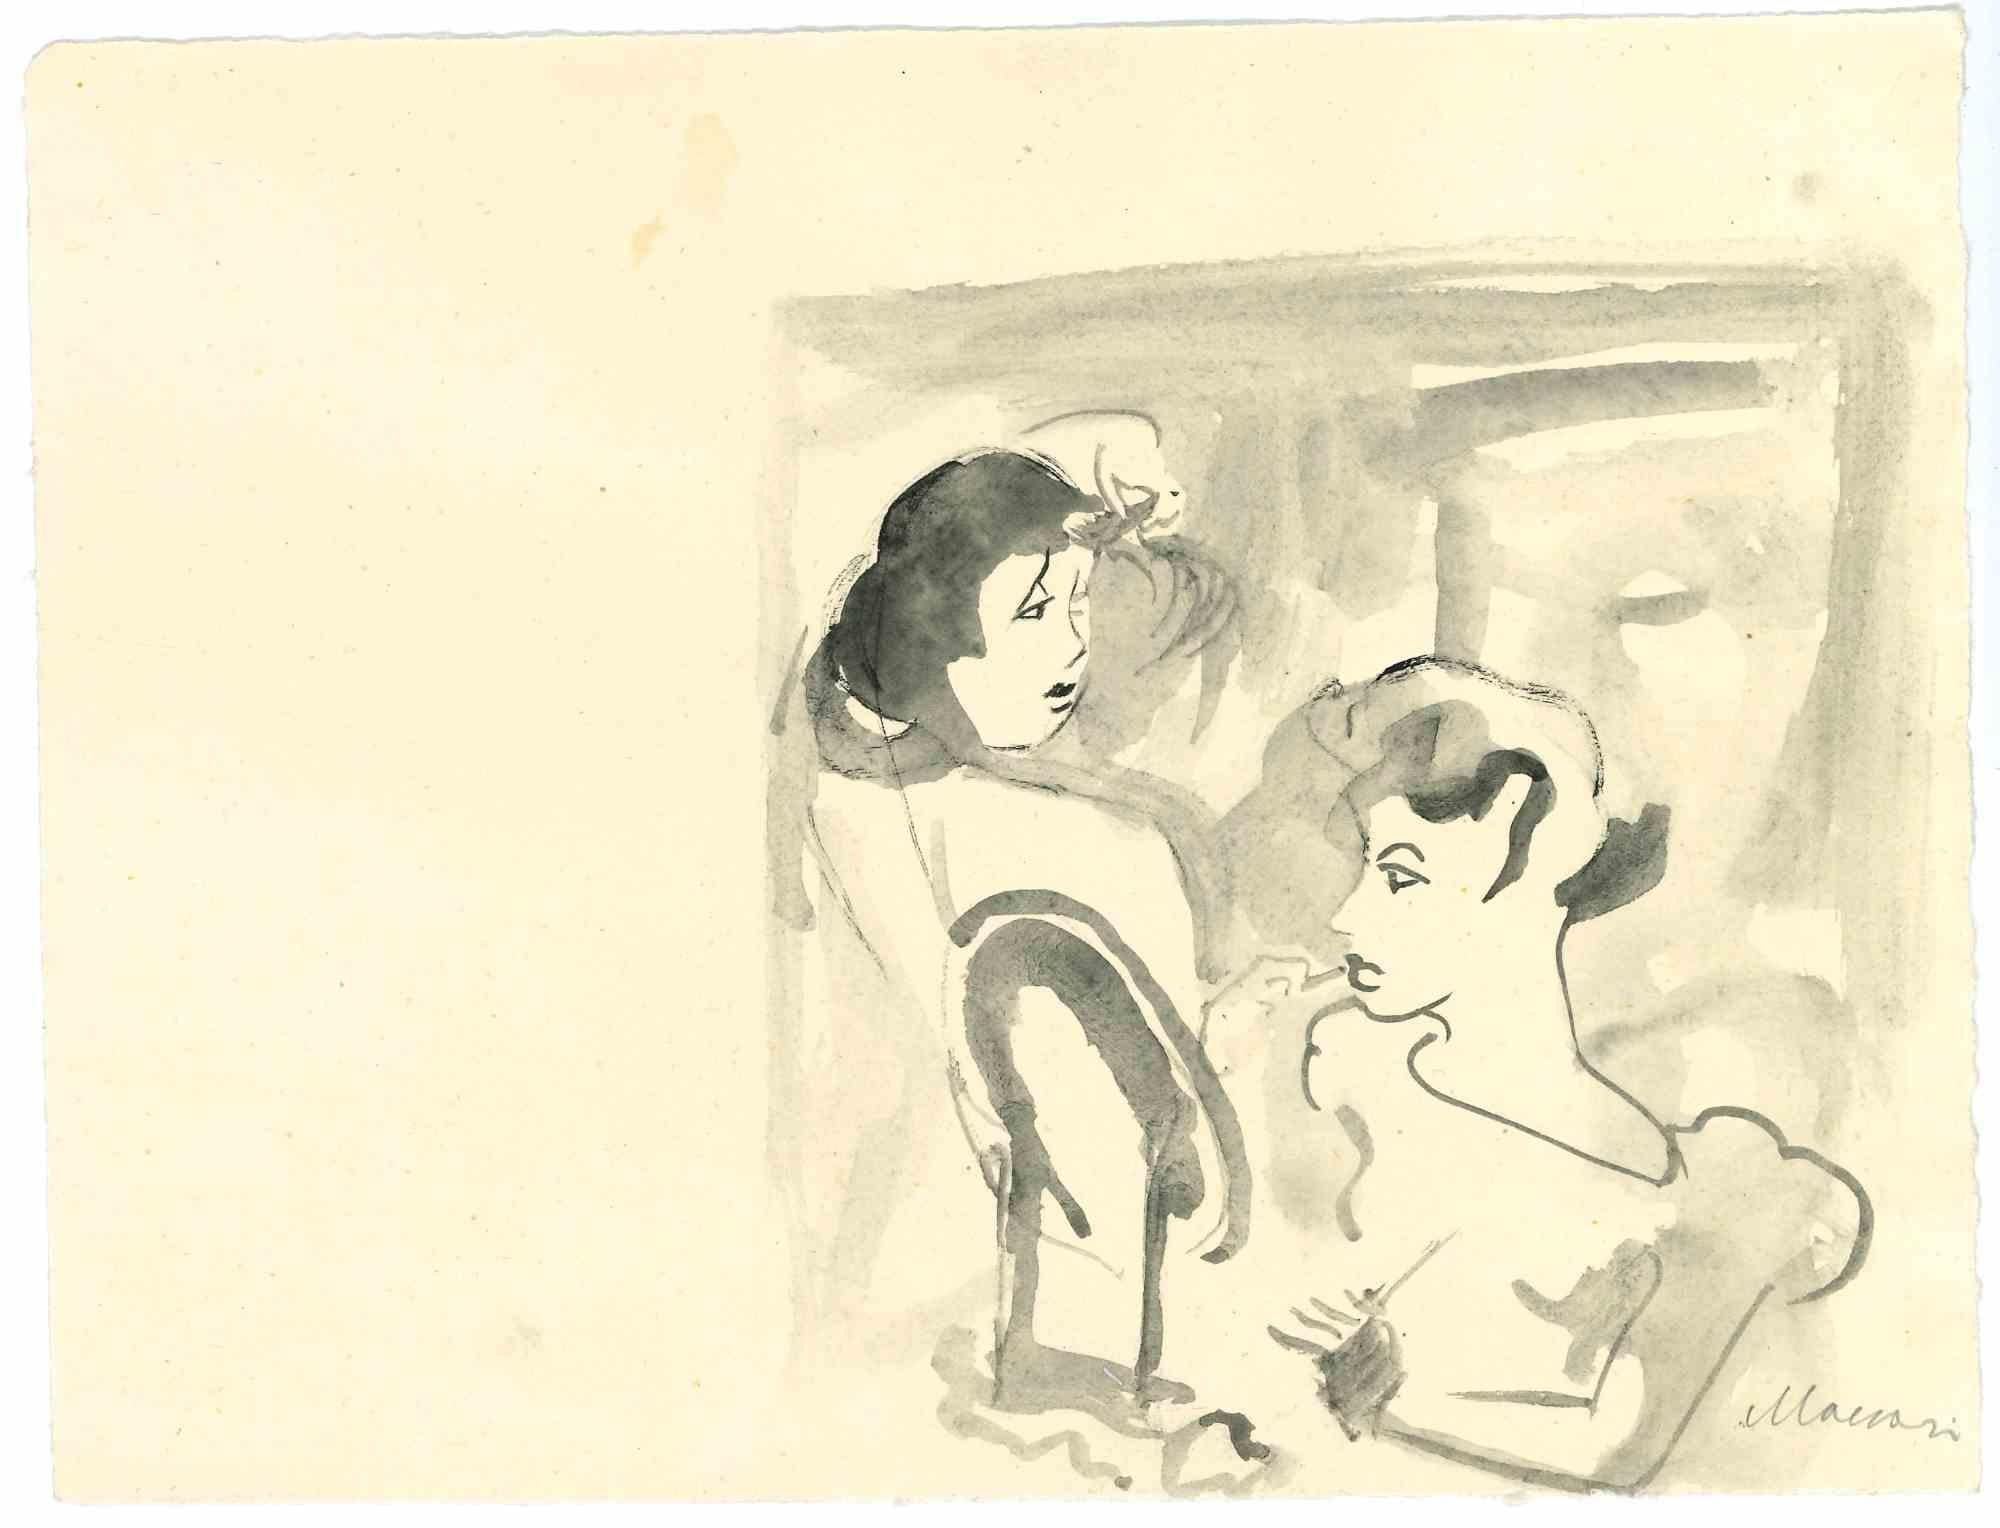 Womanly is an Original Drawing in watercolor and China ink on creamy-colored paper realized by Mino Maccari in the mid-20th century.

Hand-signed by the artist on the lower.

Good conditions.

Mino Maccari (1898-1989) was an Italian writer, painter,